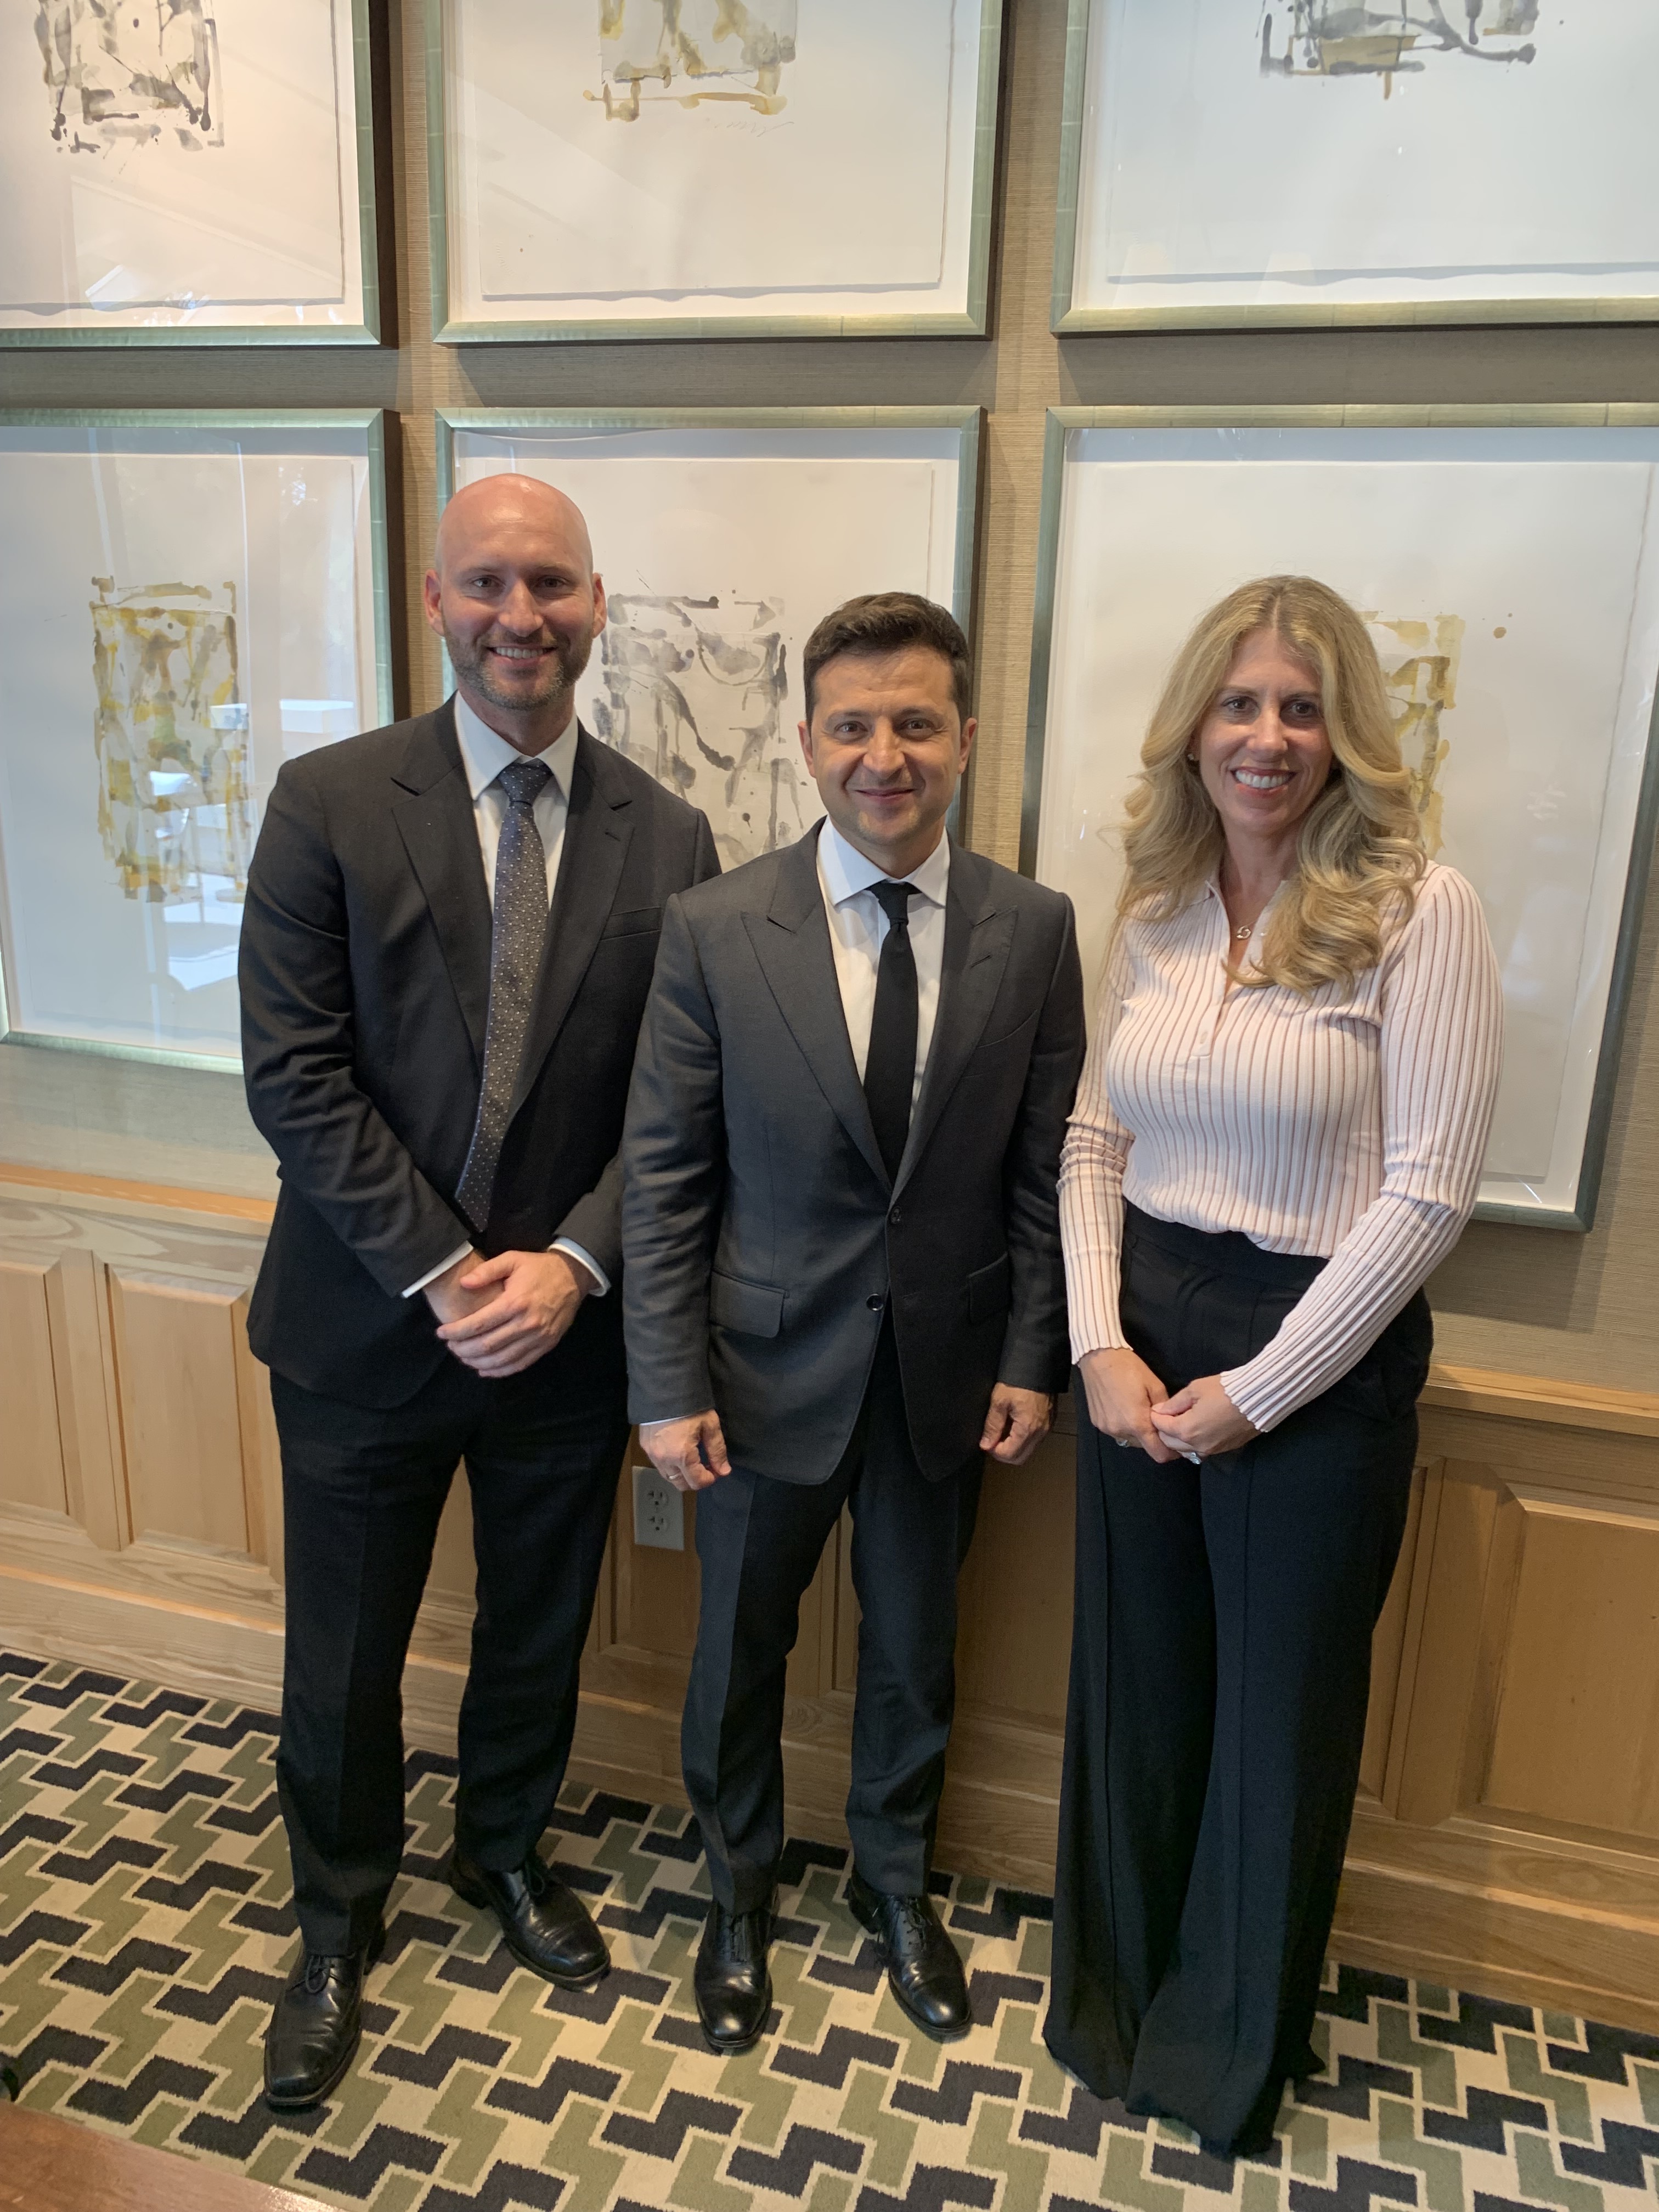 TVstation slump Ørken Stellar on Twitter: "Today we welcomed Ukrainian President Volodymyr  Zelensky to Silicon Valley and discussed SDF's ongoing support for  Ukraine's digital economy. We commend Ukraine's forward-looking leadership  and commitment to delivering digital